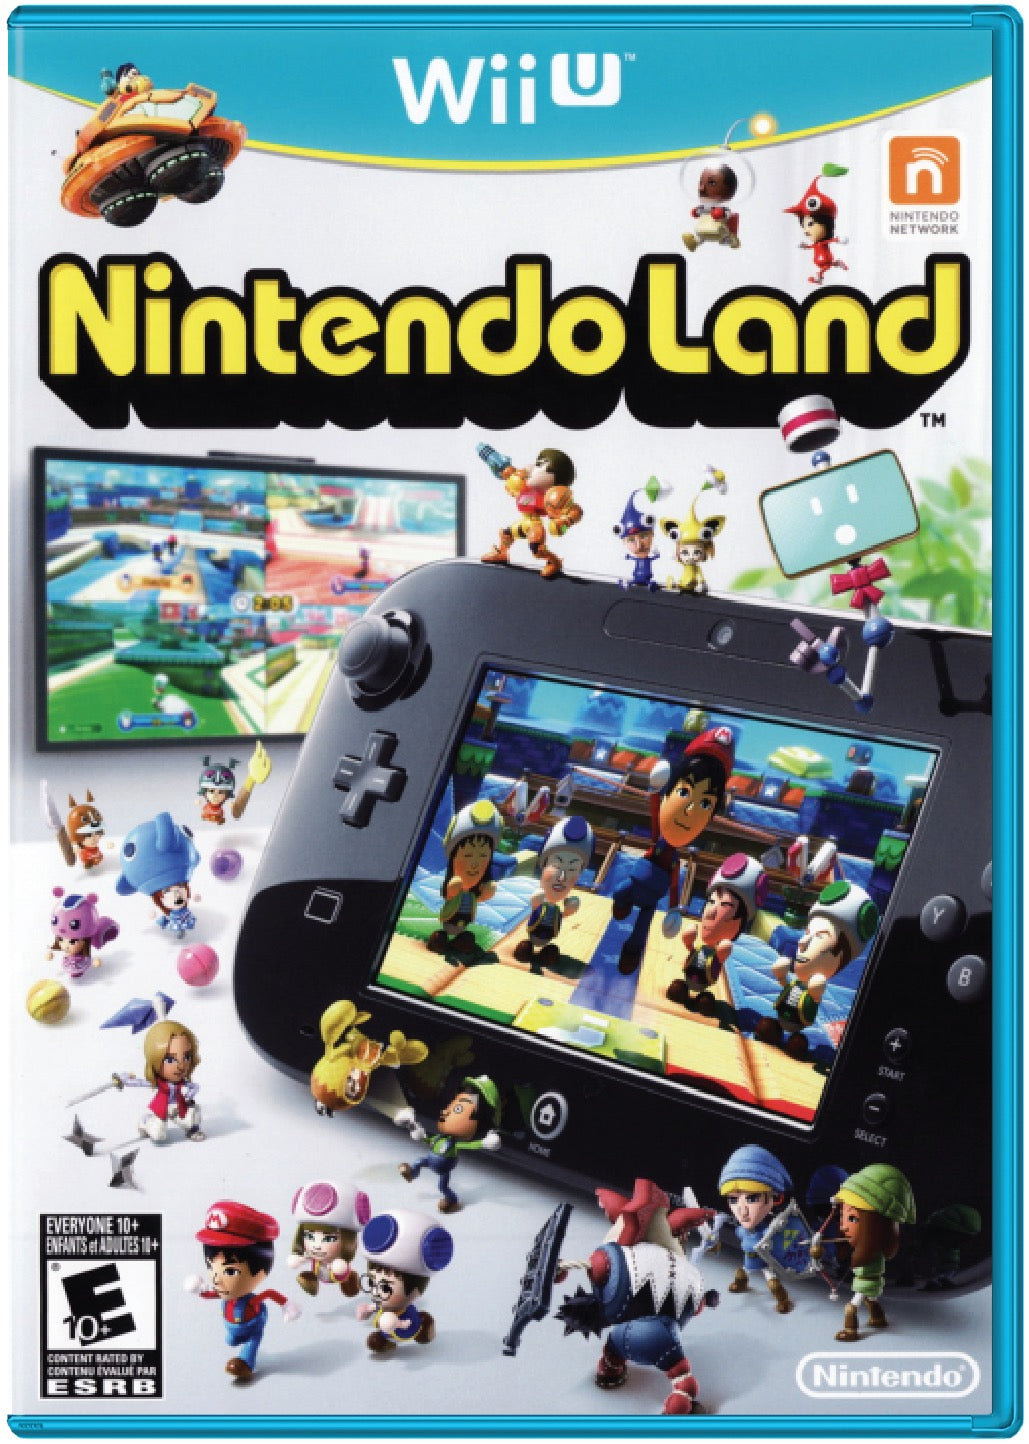 Nintendo Land Cover Art and Product Photo